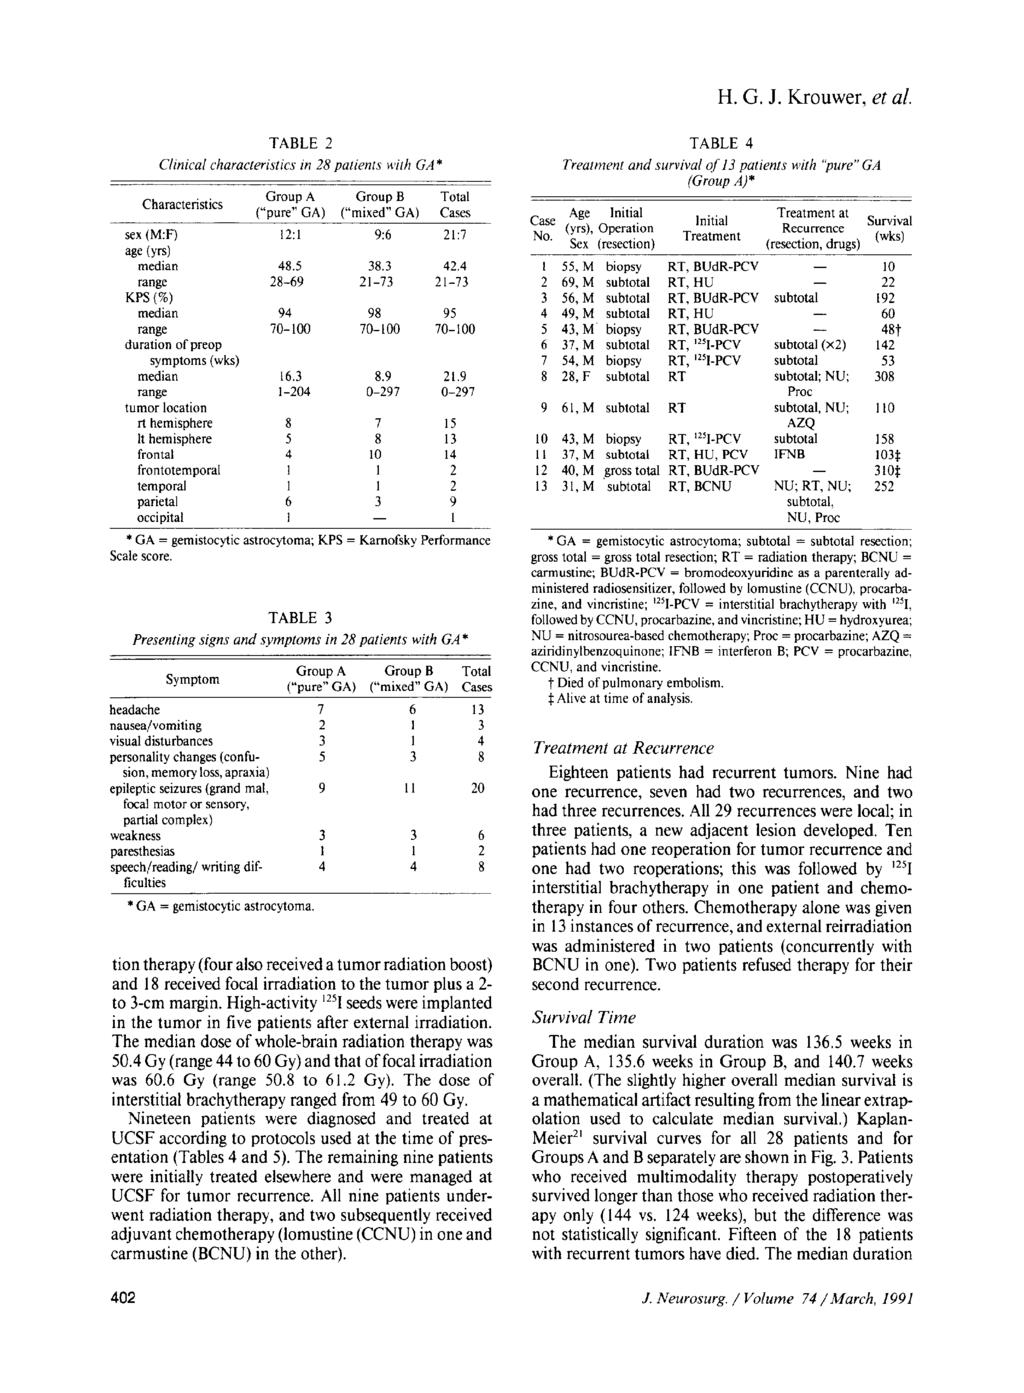 H. G. J. Krouwer, et al. TABLE 2 Clinical characteristics" m 28 patients wilh GA * Characteristics Group A ("pure" GA) Group B ("mixed" GA) Total Cases sex (M:F) 12:1 9:6 21:7 age (yrs) median 48.